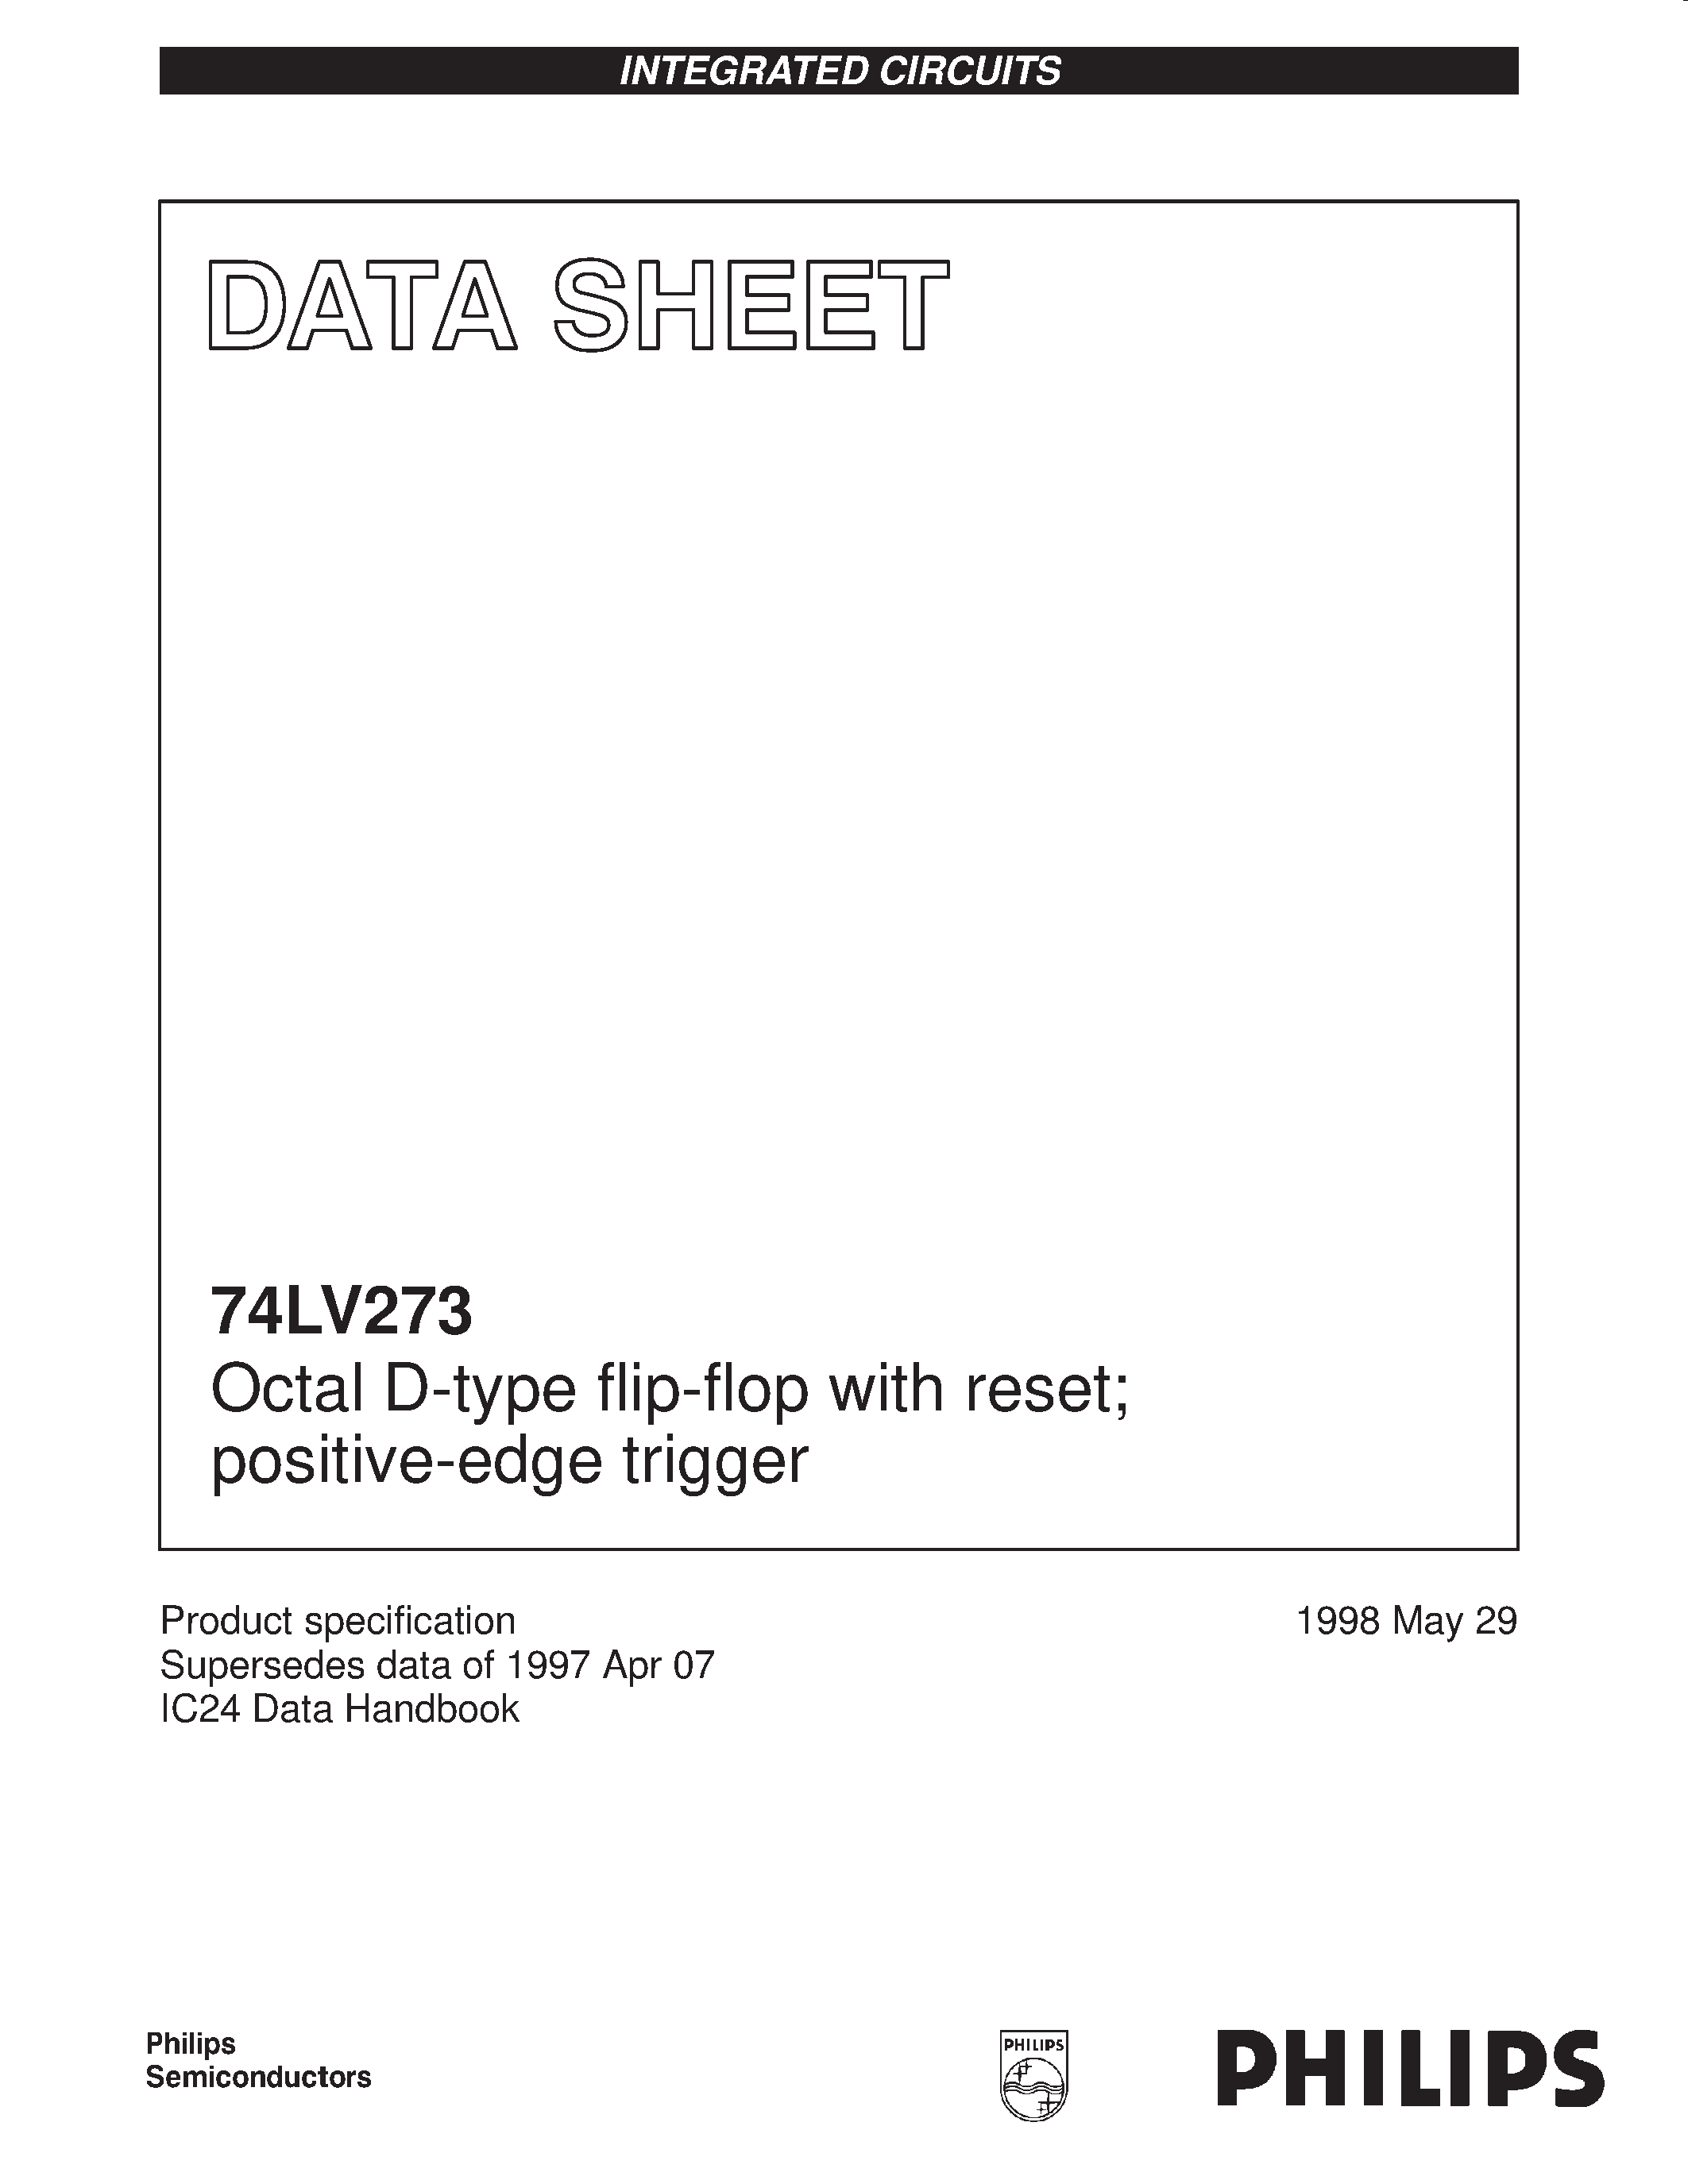 Datasheet 74LV273 - Octal D-type flip-flop with reset; positive-edge trigger page 1